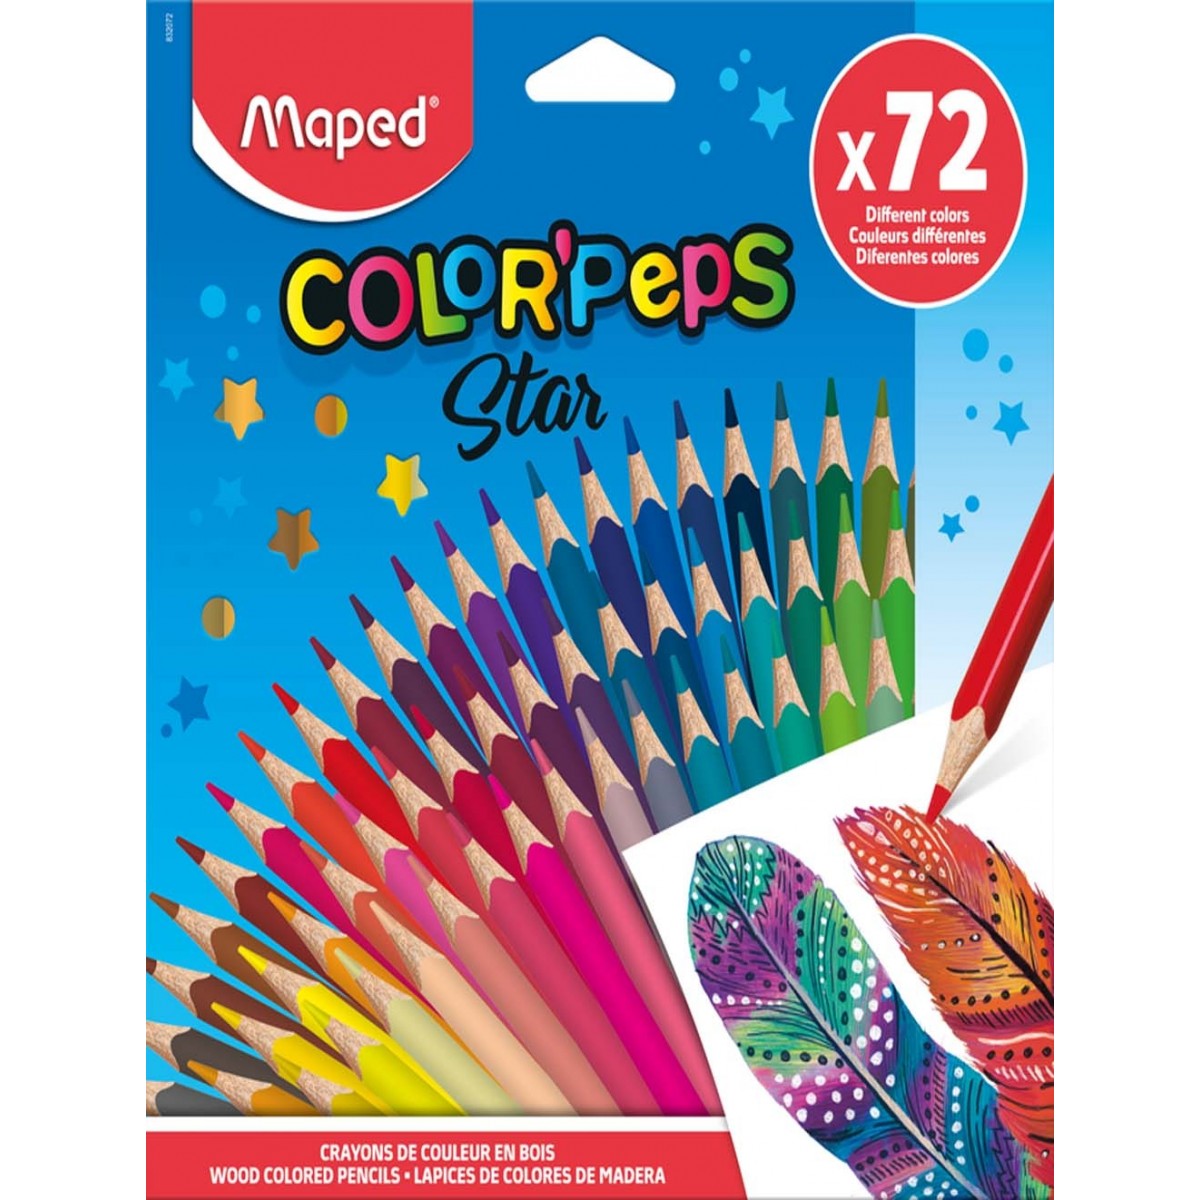 Maped Color peps Star Color pencil 72 